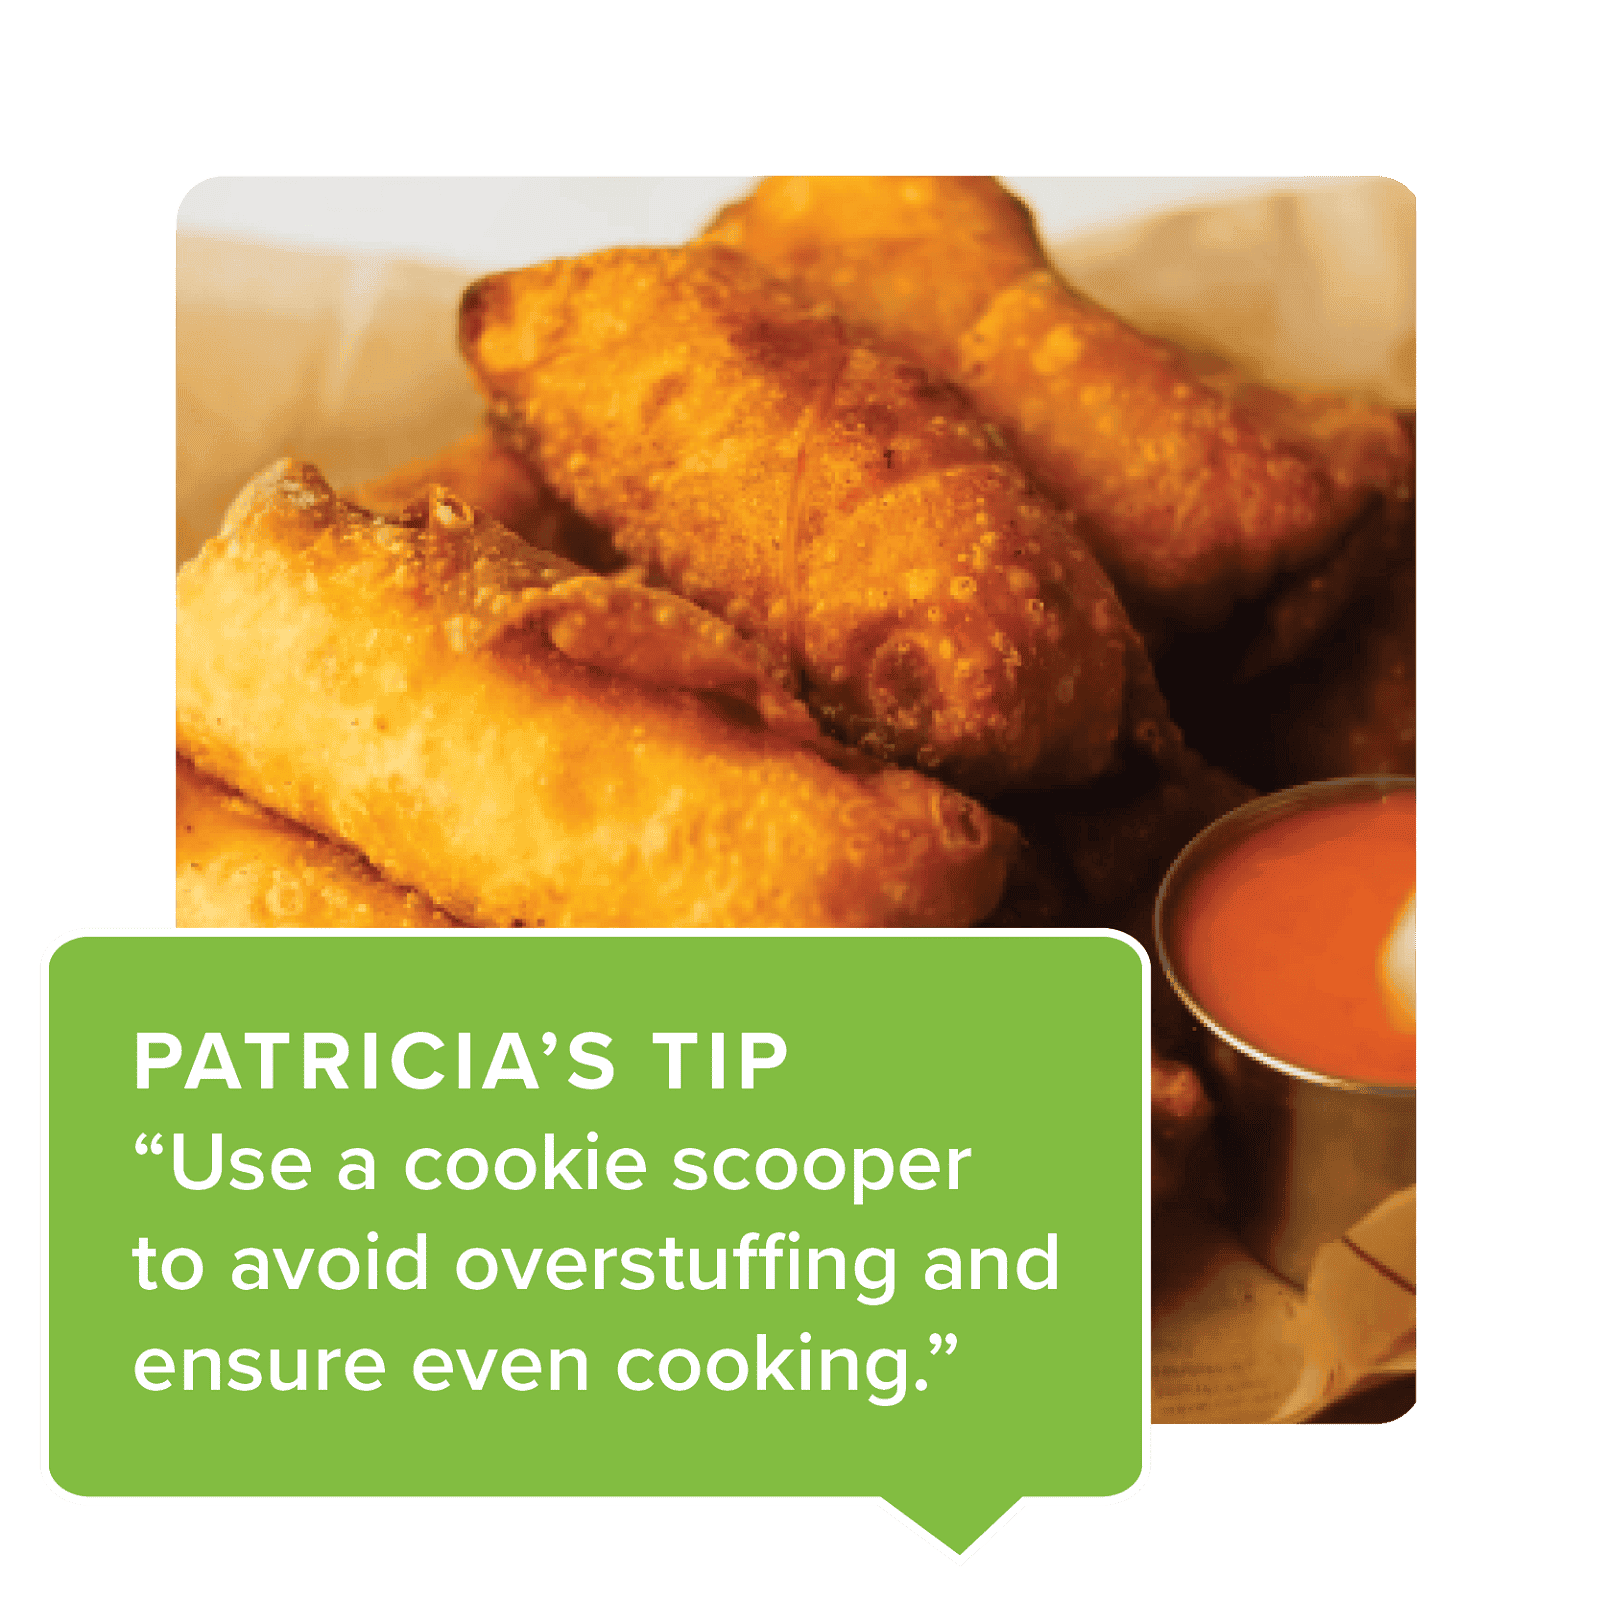 Buffalo Chicken Egg Rolls - Patricia's Tip: "Use a cookie scooper to avoid overstuffing and ensure even cooking."